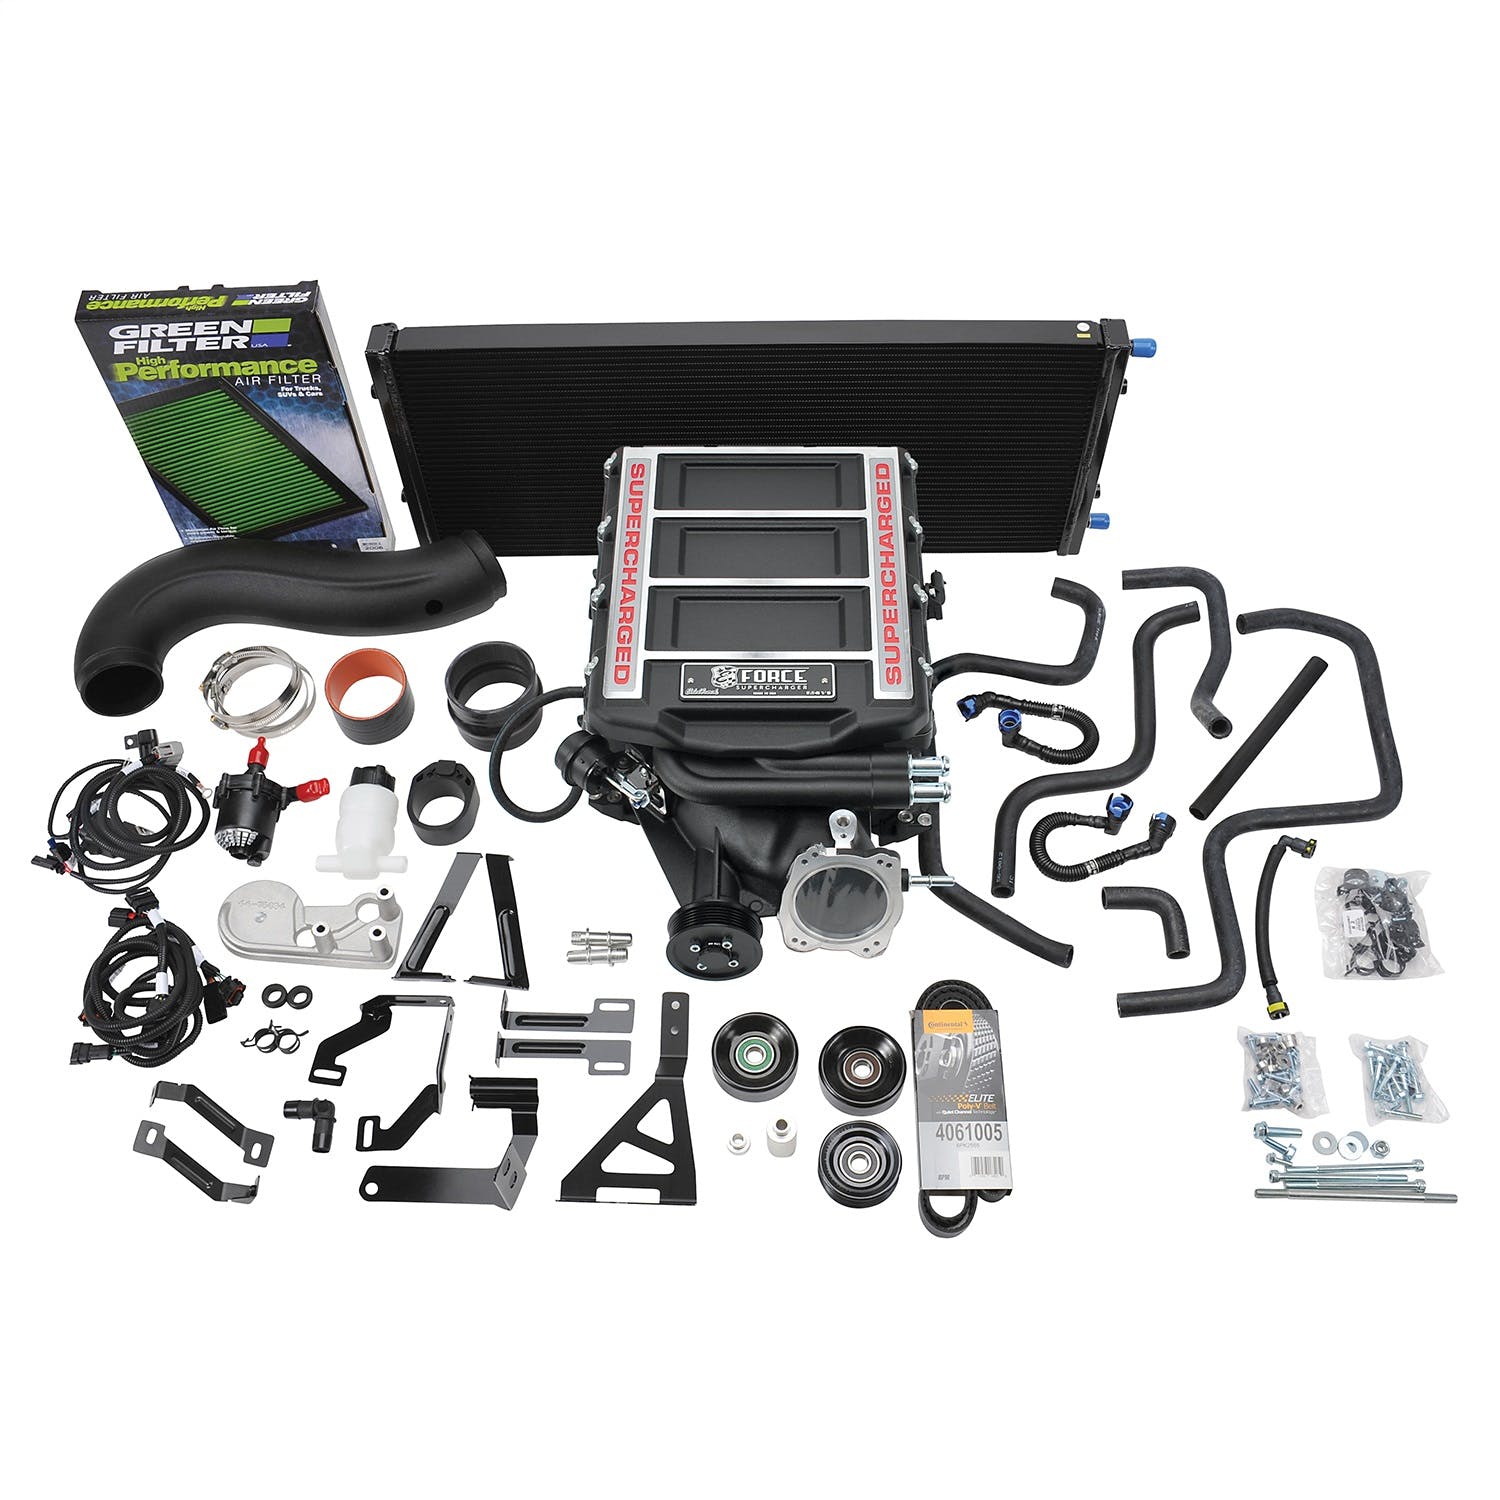 Edelbrock 156630 E-Force Supercharger R2650 DP3C Chevy/GMC 2014-18 Gen V Truck and SUV 5.3L